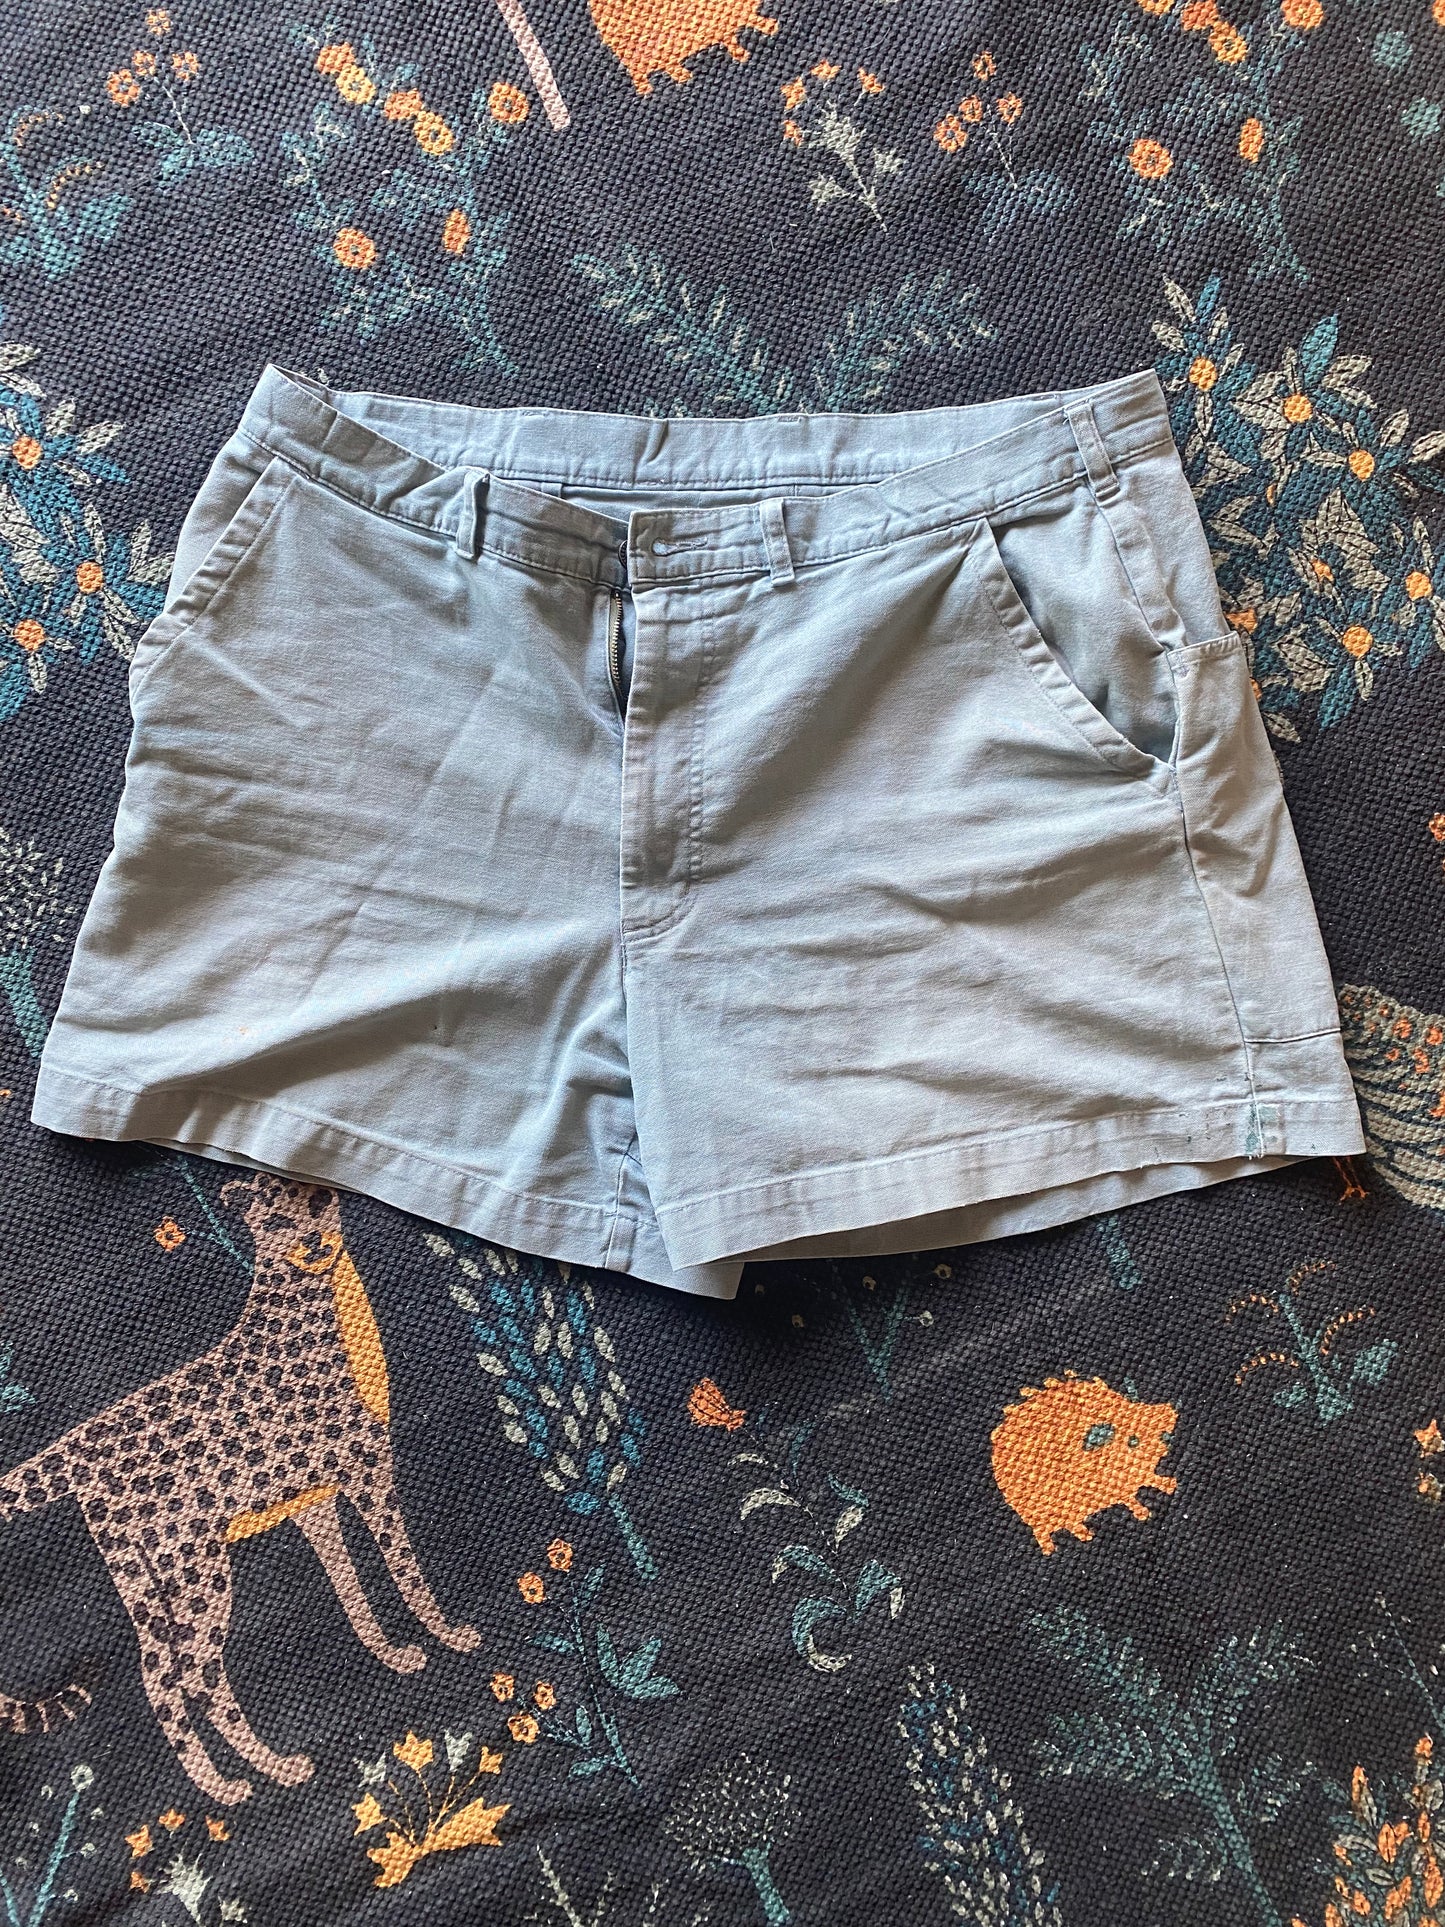 Patagonia Sage Green Stand Up Shorts - Brimm Archive Wardrobe Research